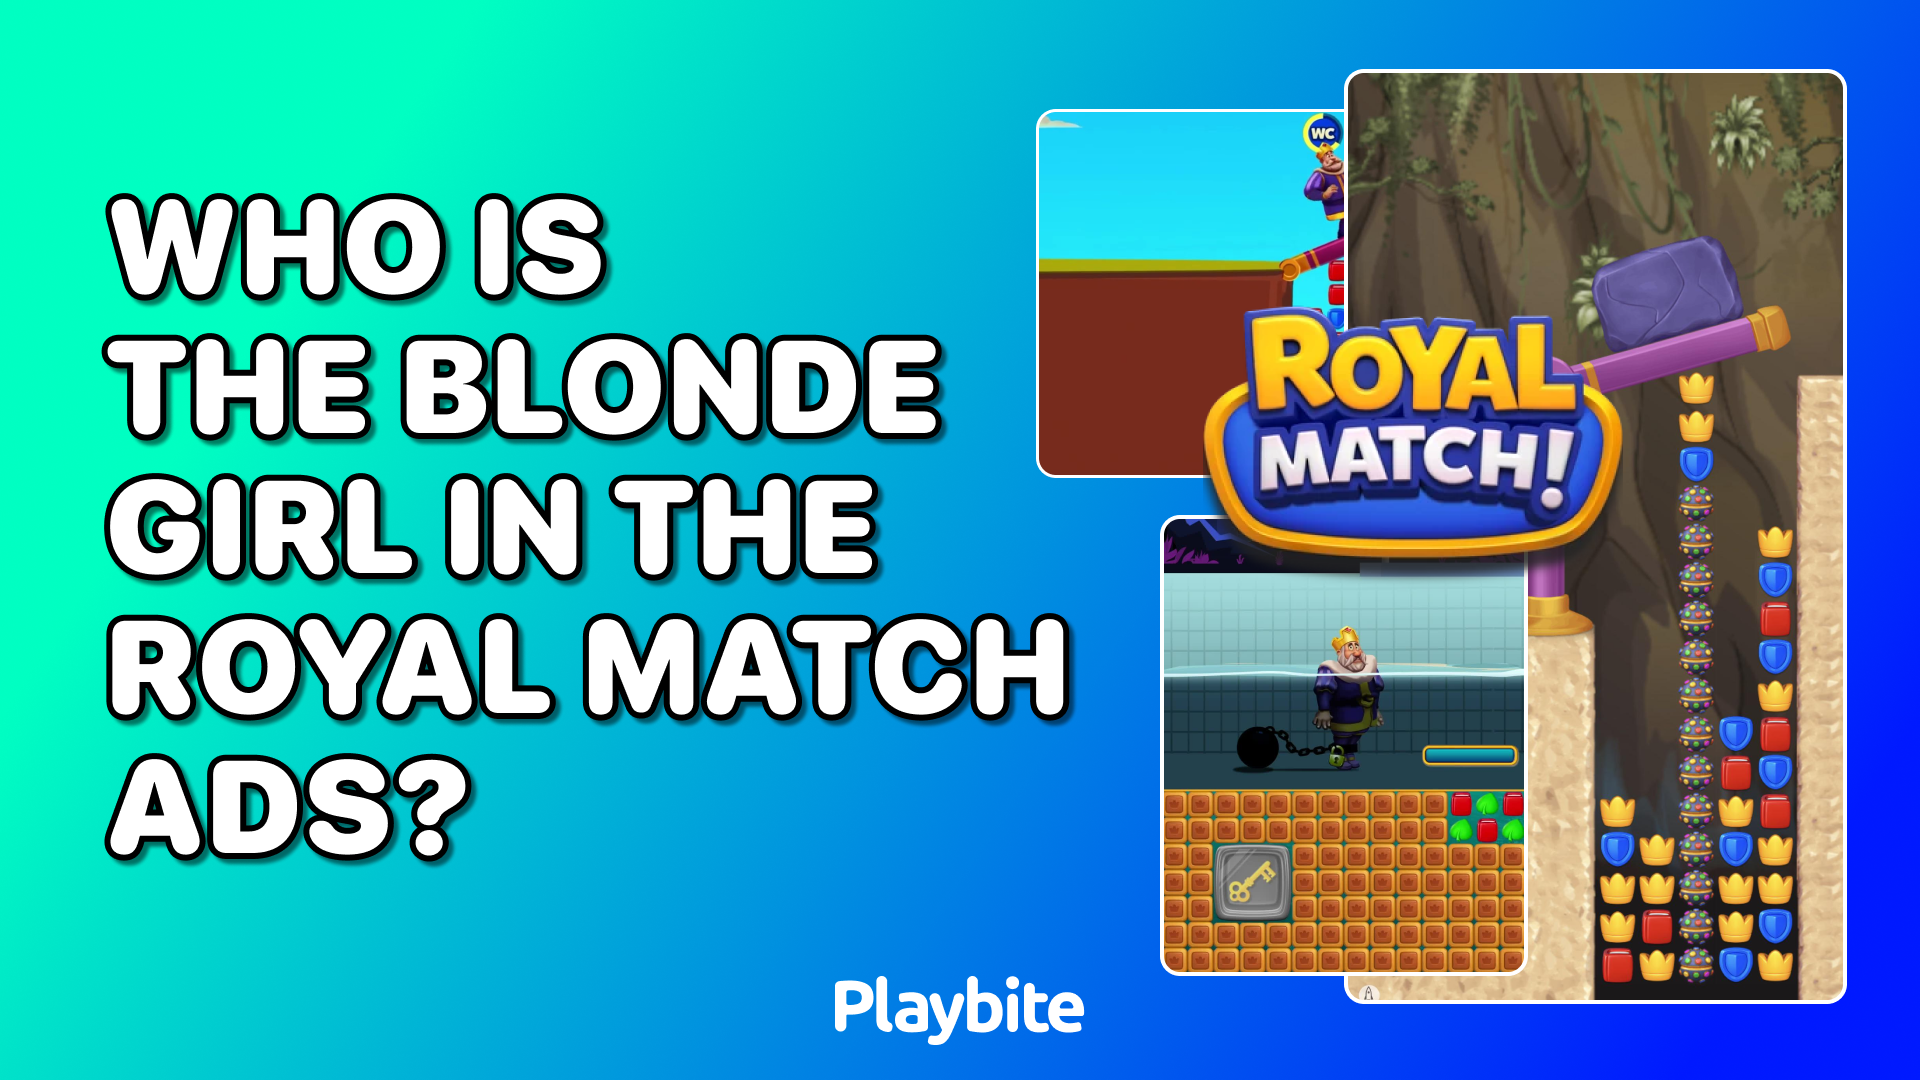 Who Is the Blonde Girl in the Royal Match Ads?